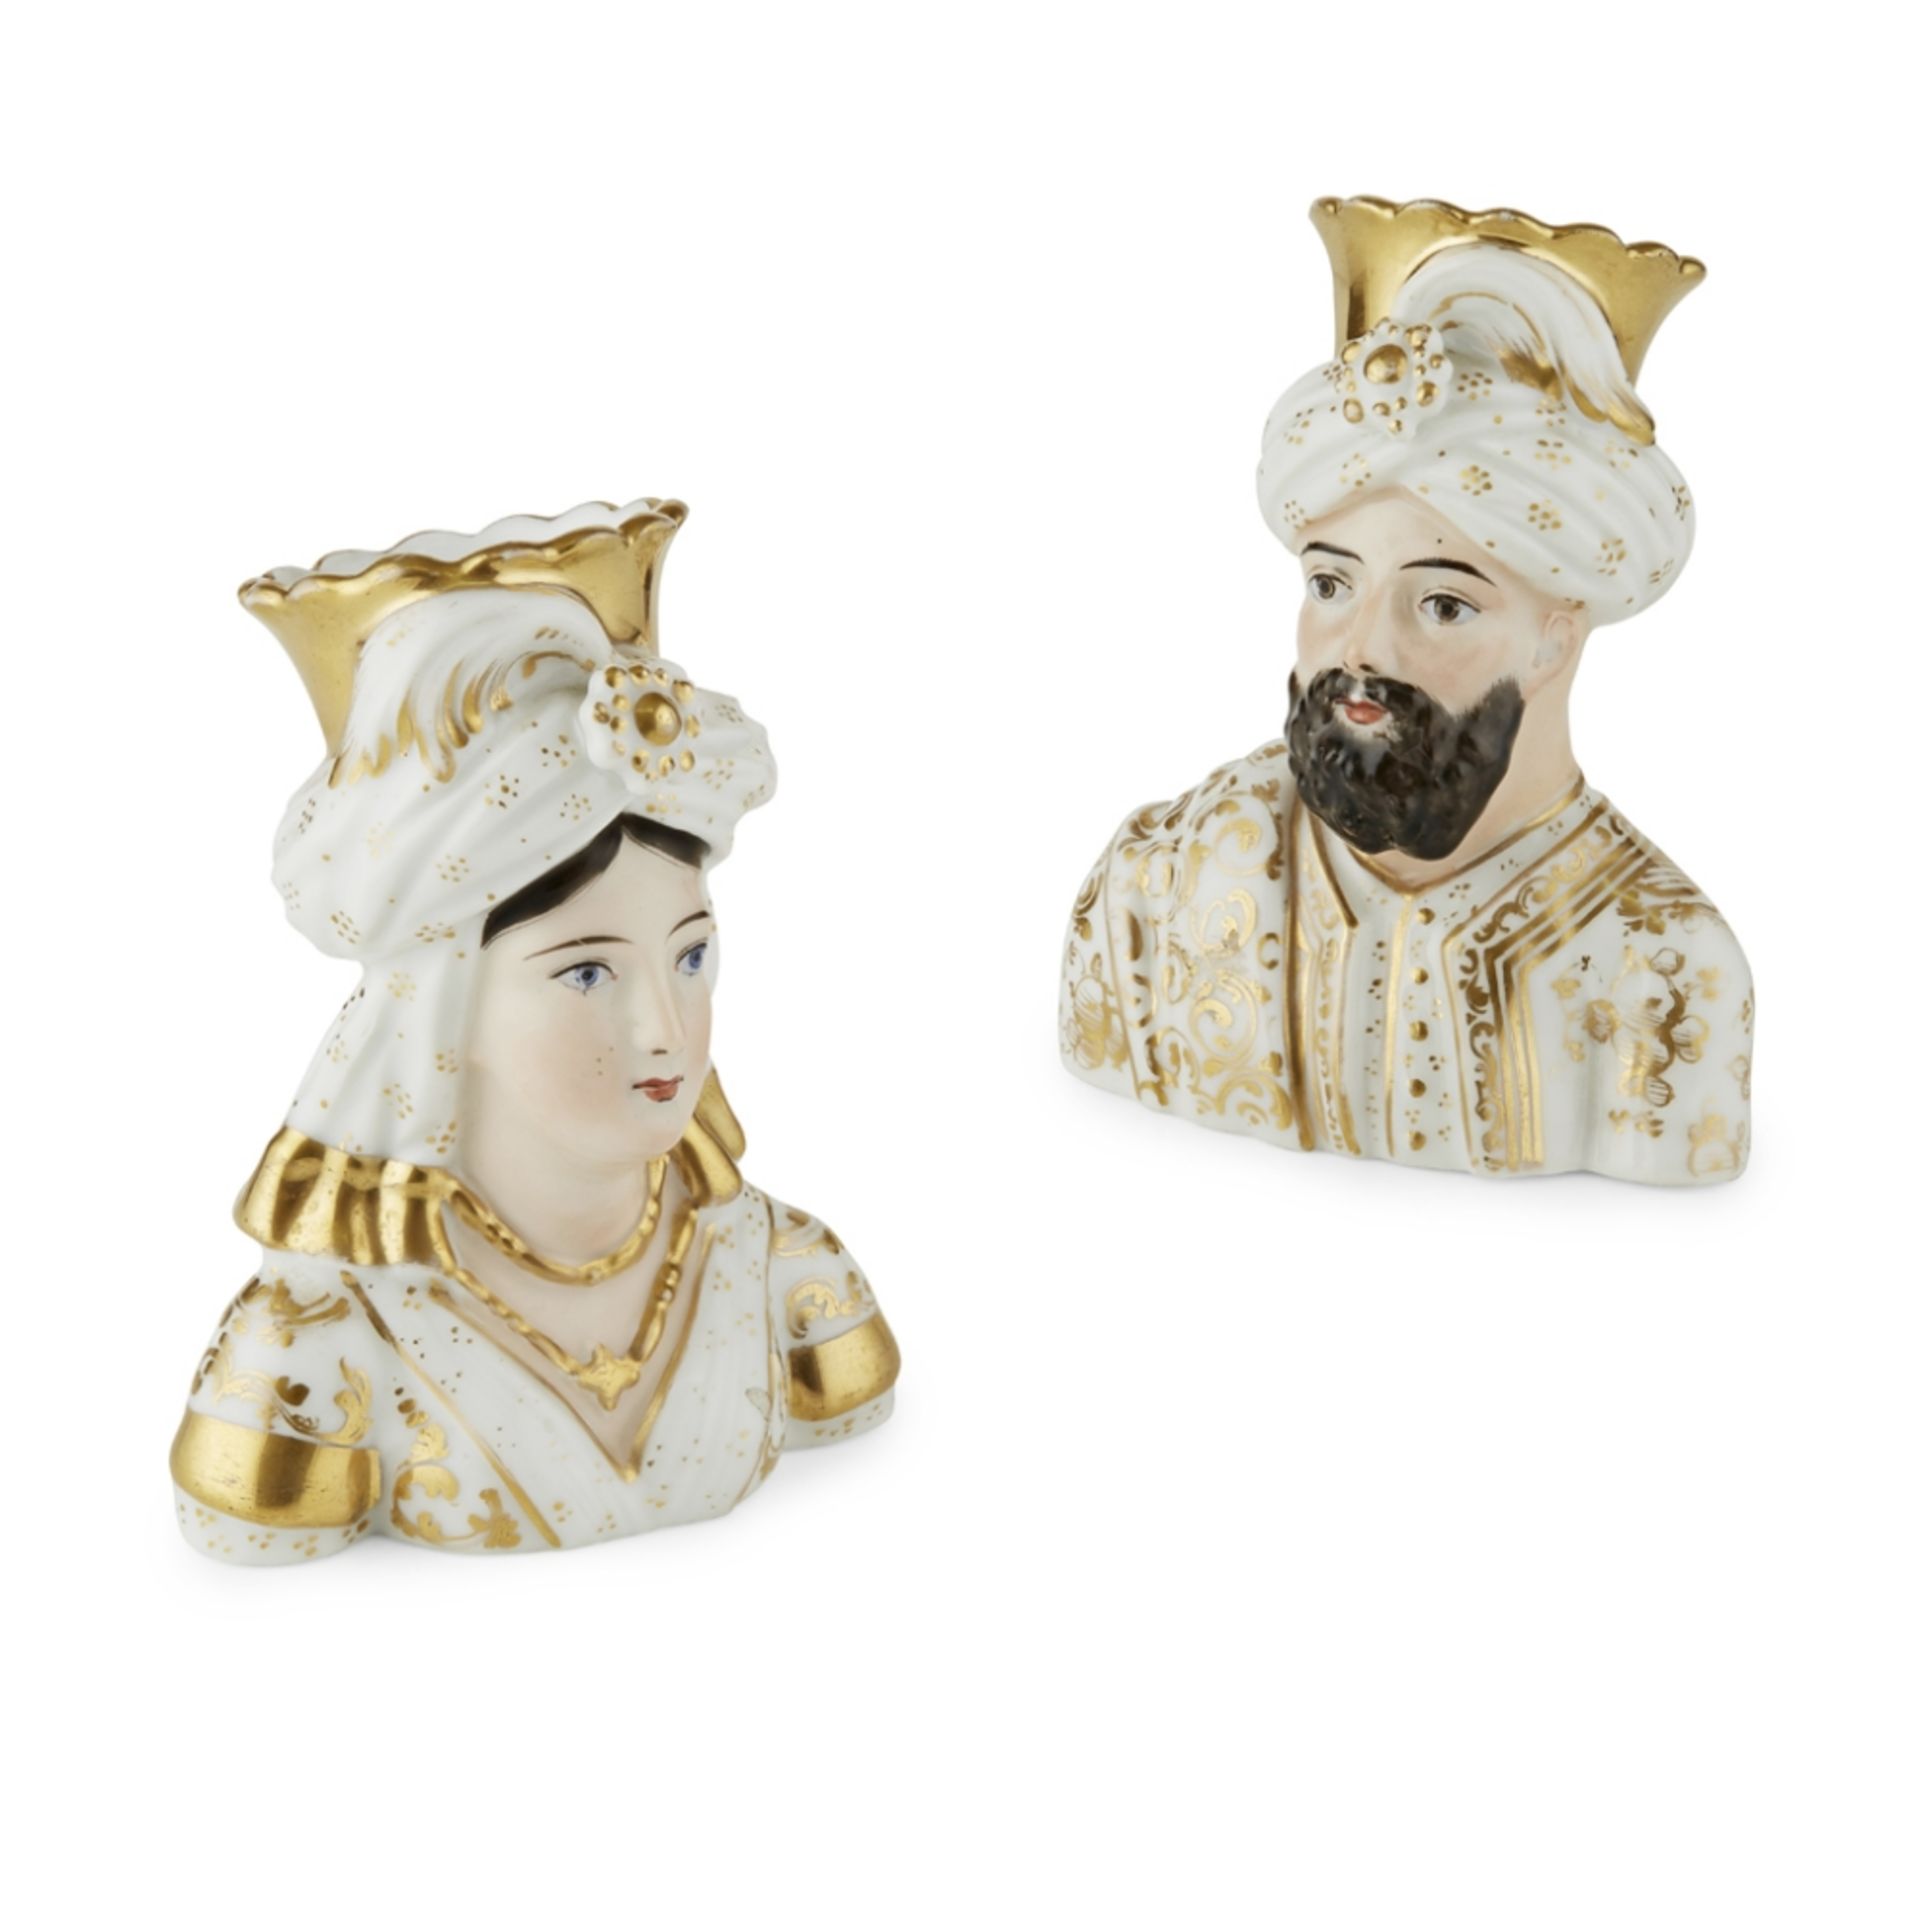 PAIR OF PORCELAINE DE PARIS BUSTS OF OTTOMANS19TH CENTURY modelled as a sultan and sultana, their - Image 2 of 2